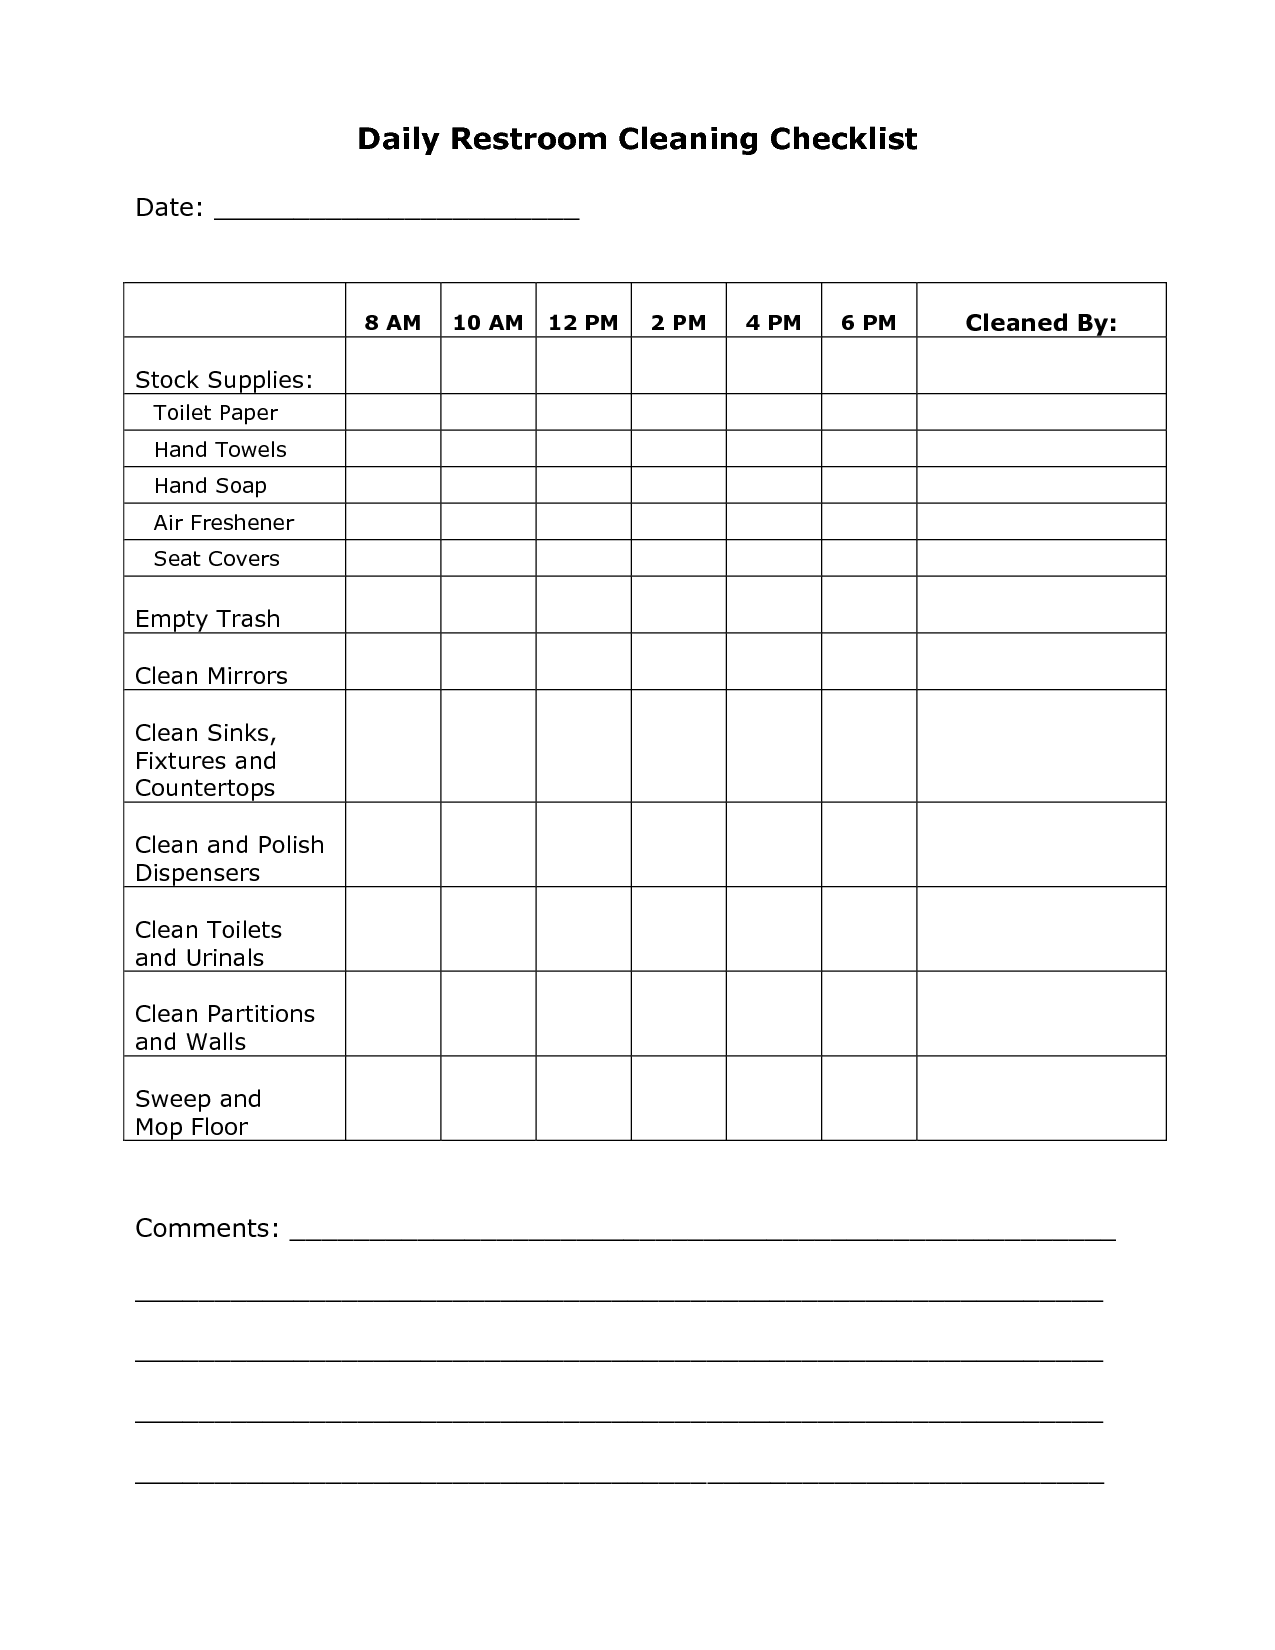 free-printable-bathroom-cleaning-checklist-charlotte-clergy-coalition